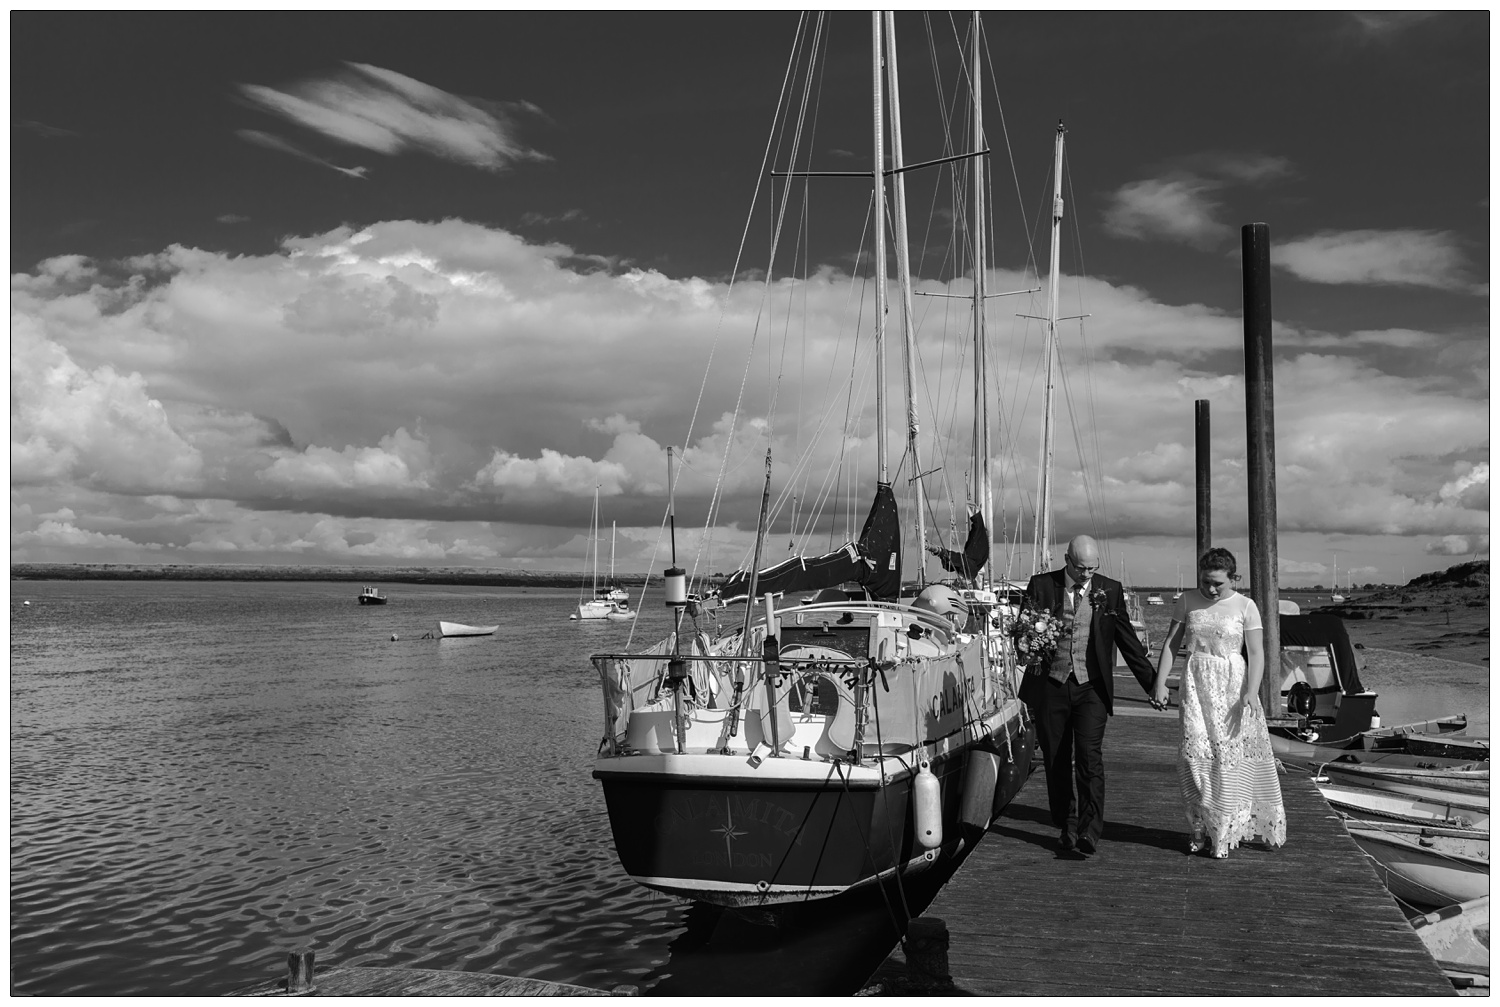 Bride and groom walk along the jetty next to a boat on the River Crouch.